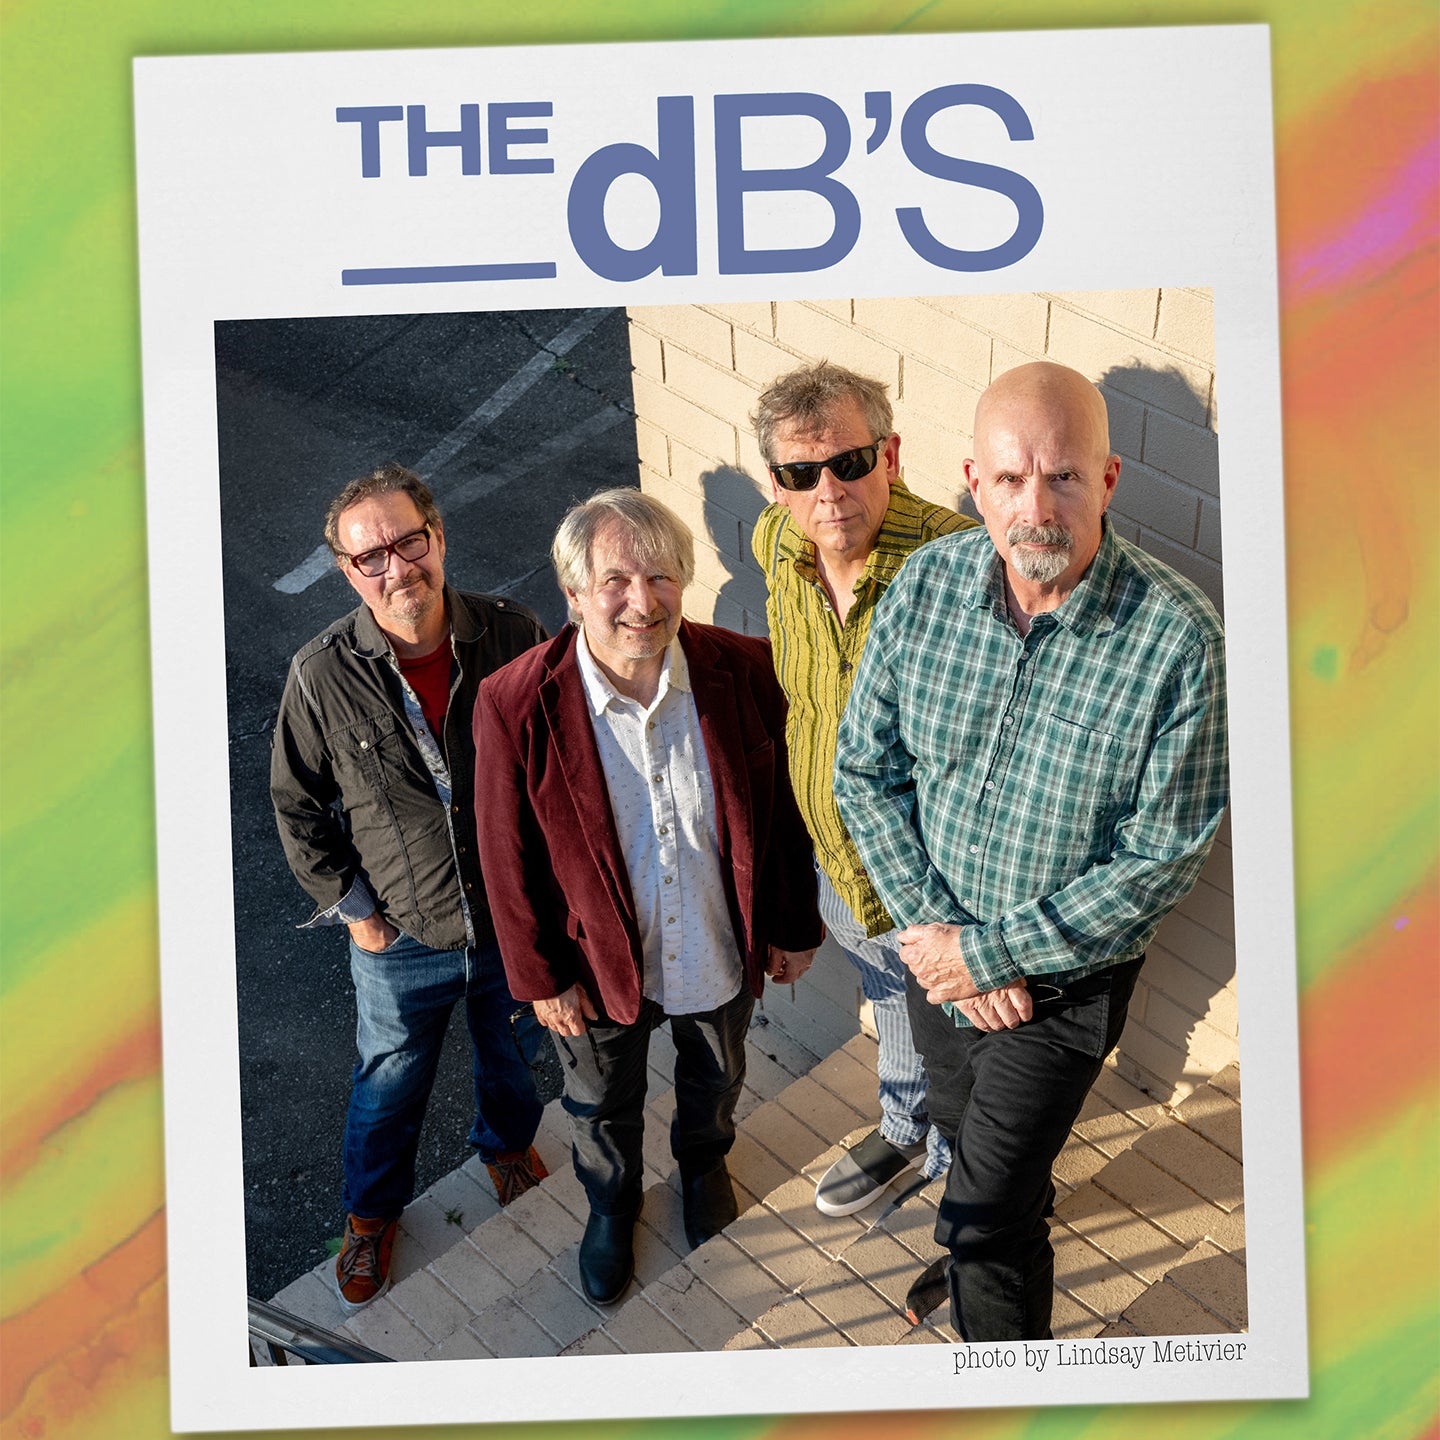 The dB's - The Original Lineup On Tour